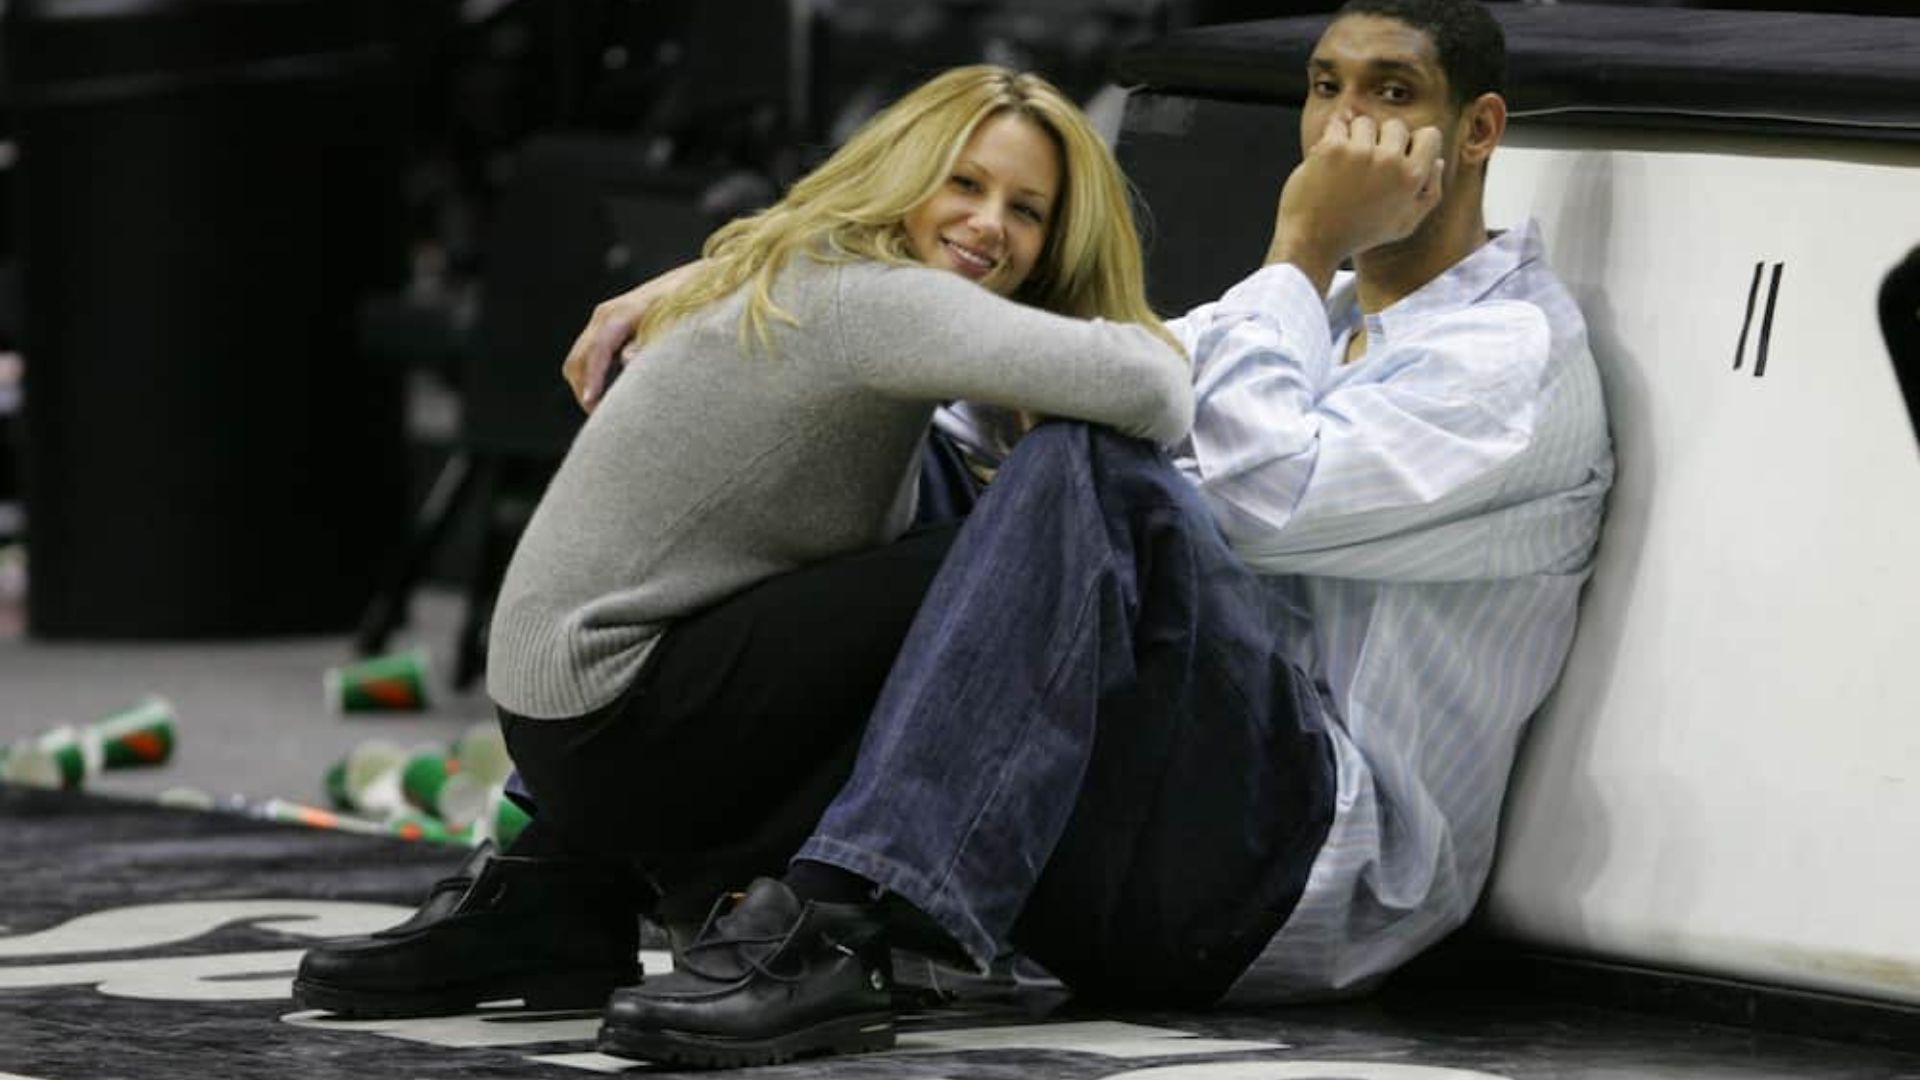 Who Is Tim Duncan Wife And What Does She Do?